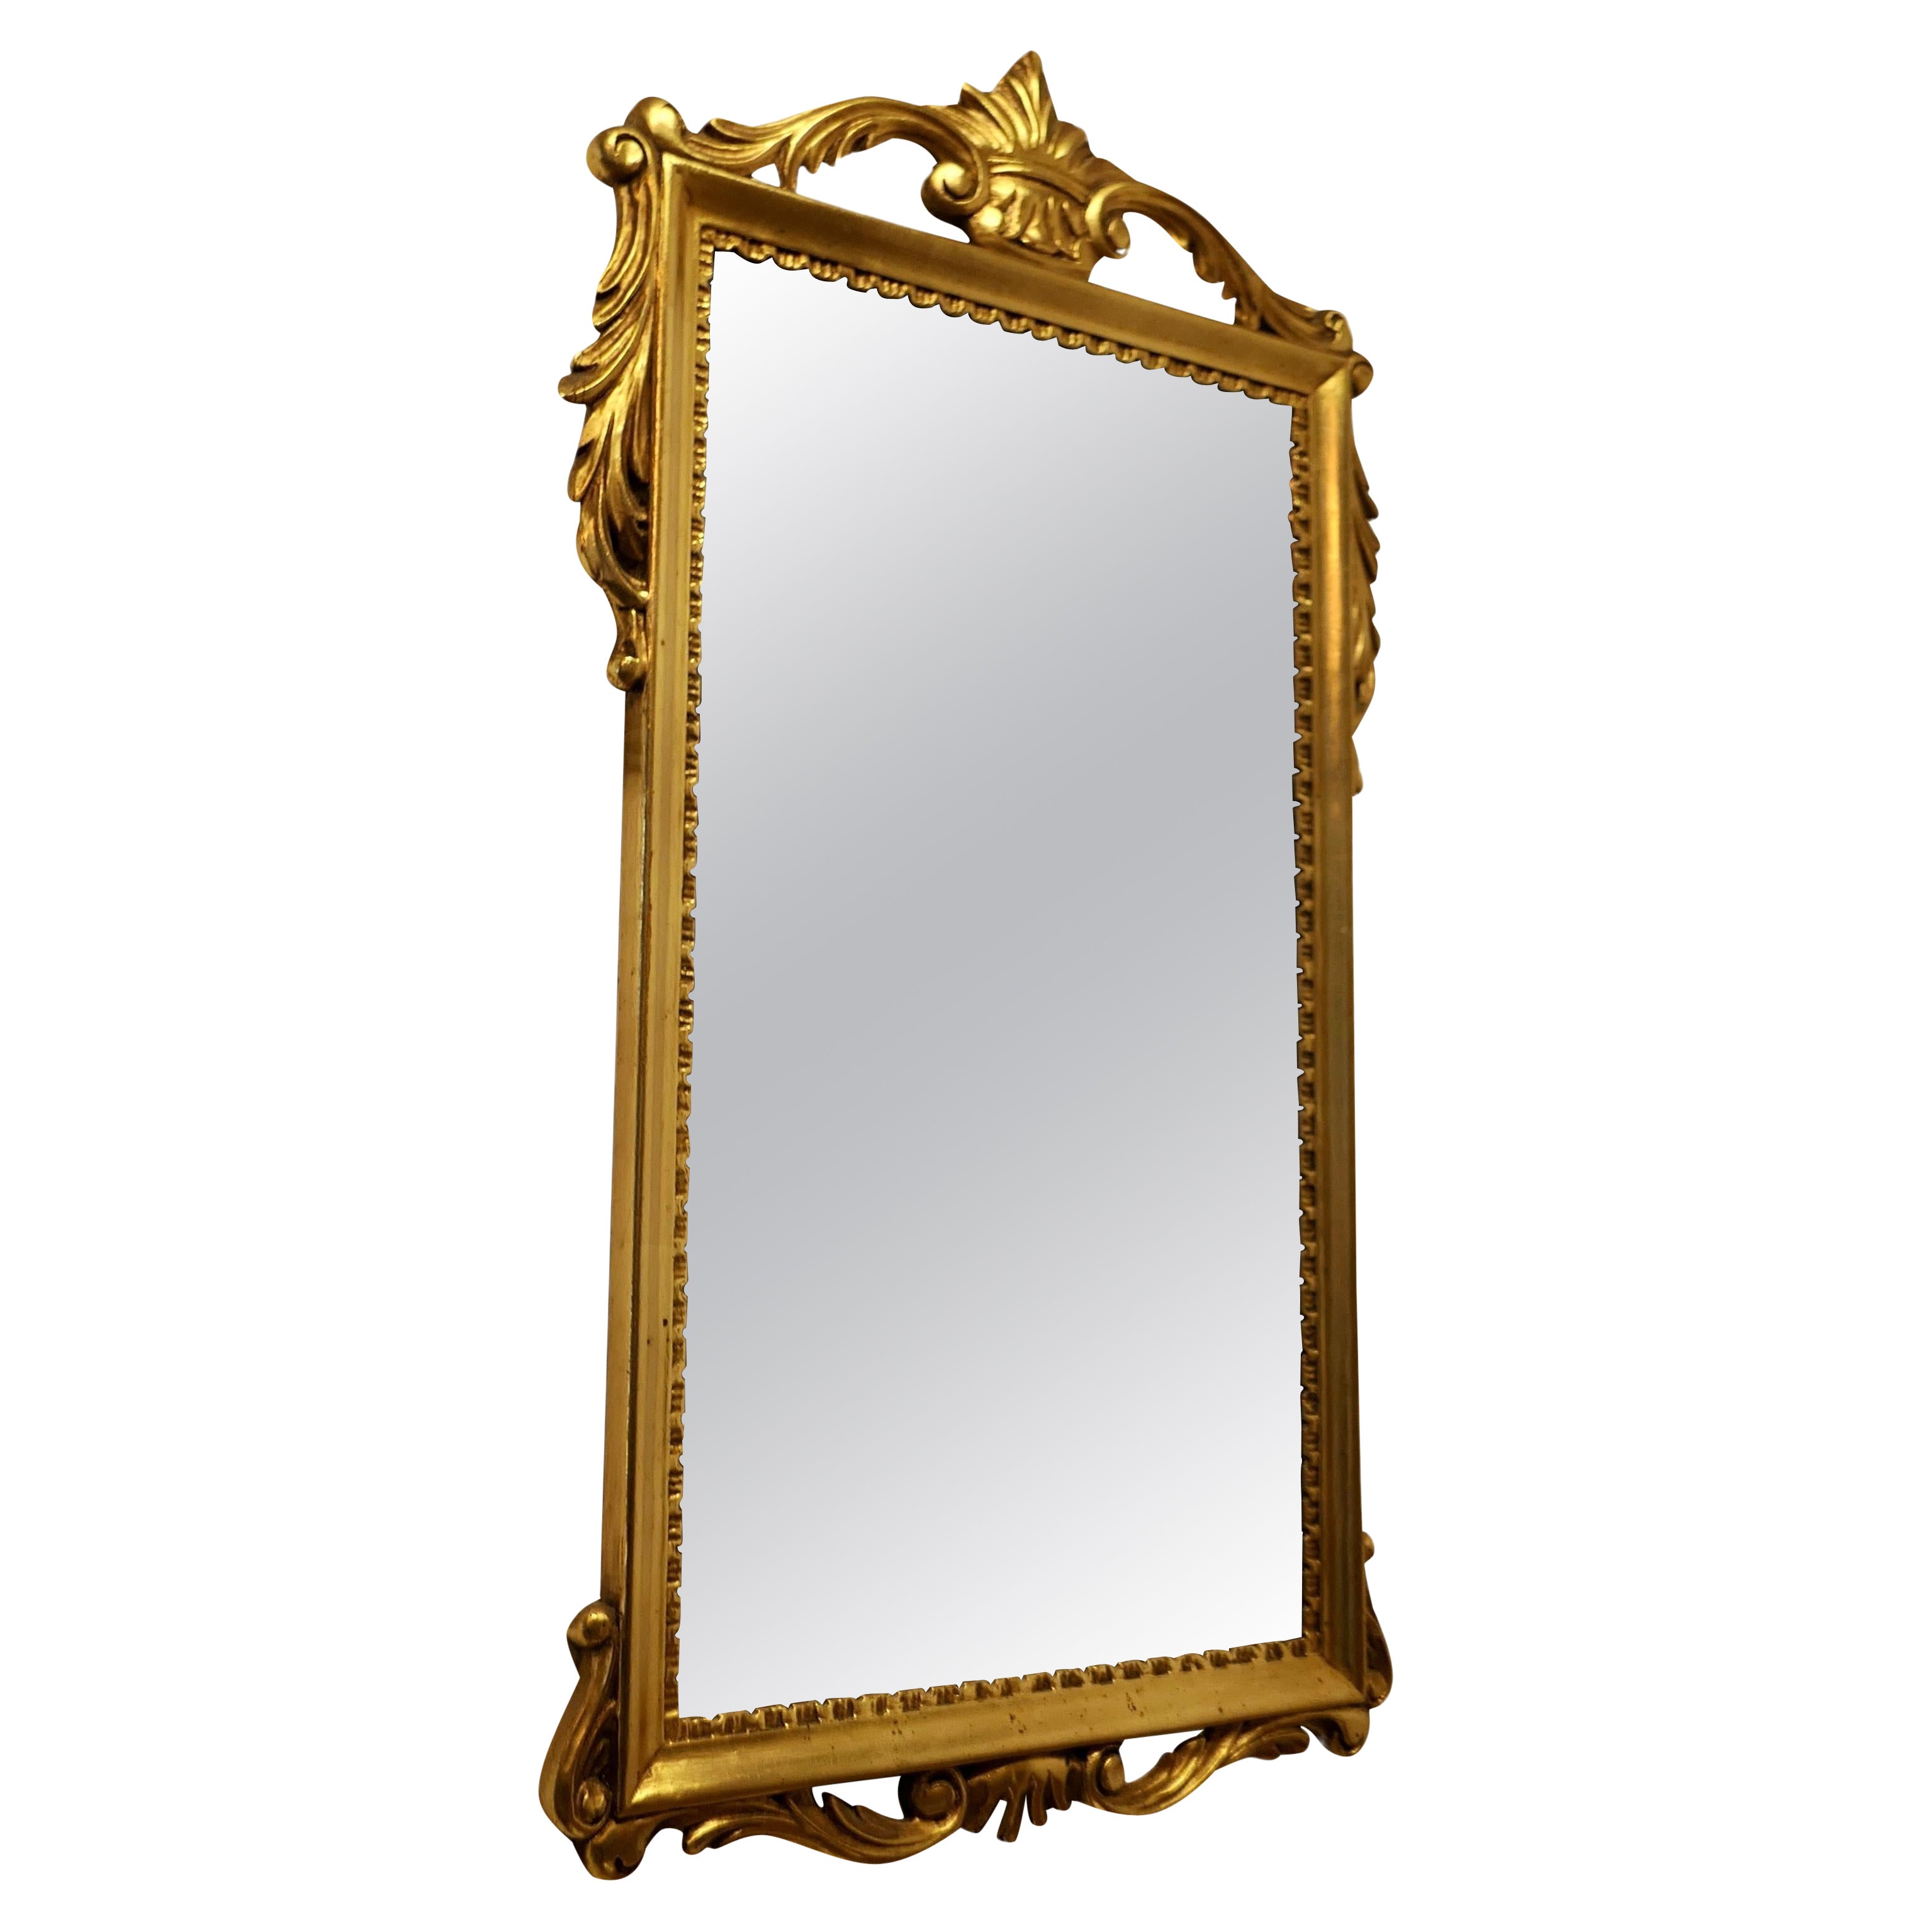 French Napoleon III Style Gilt Wall Mirror, Crown Crest   This is a very attract